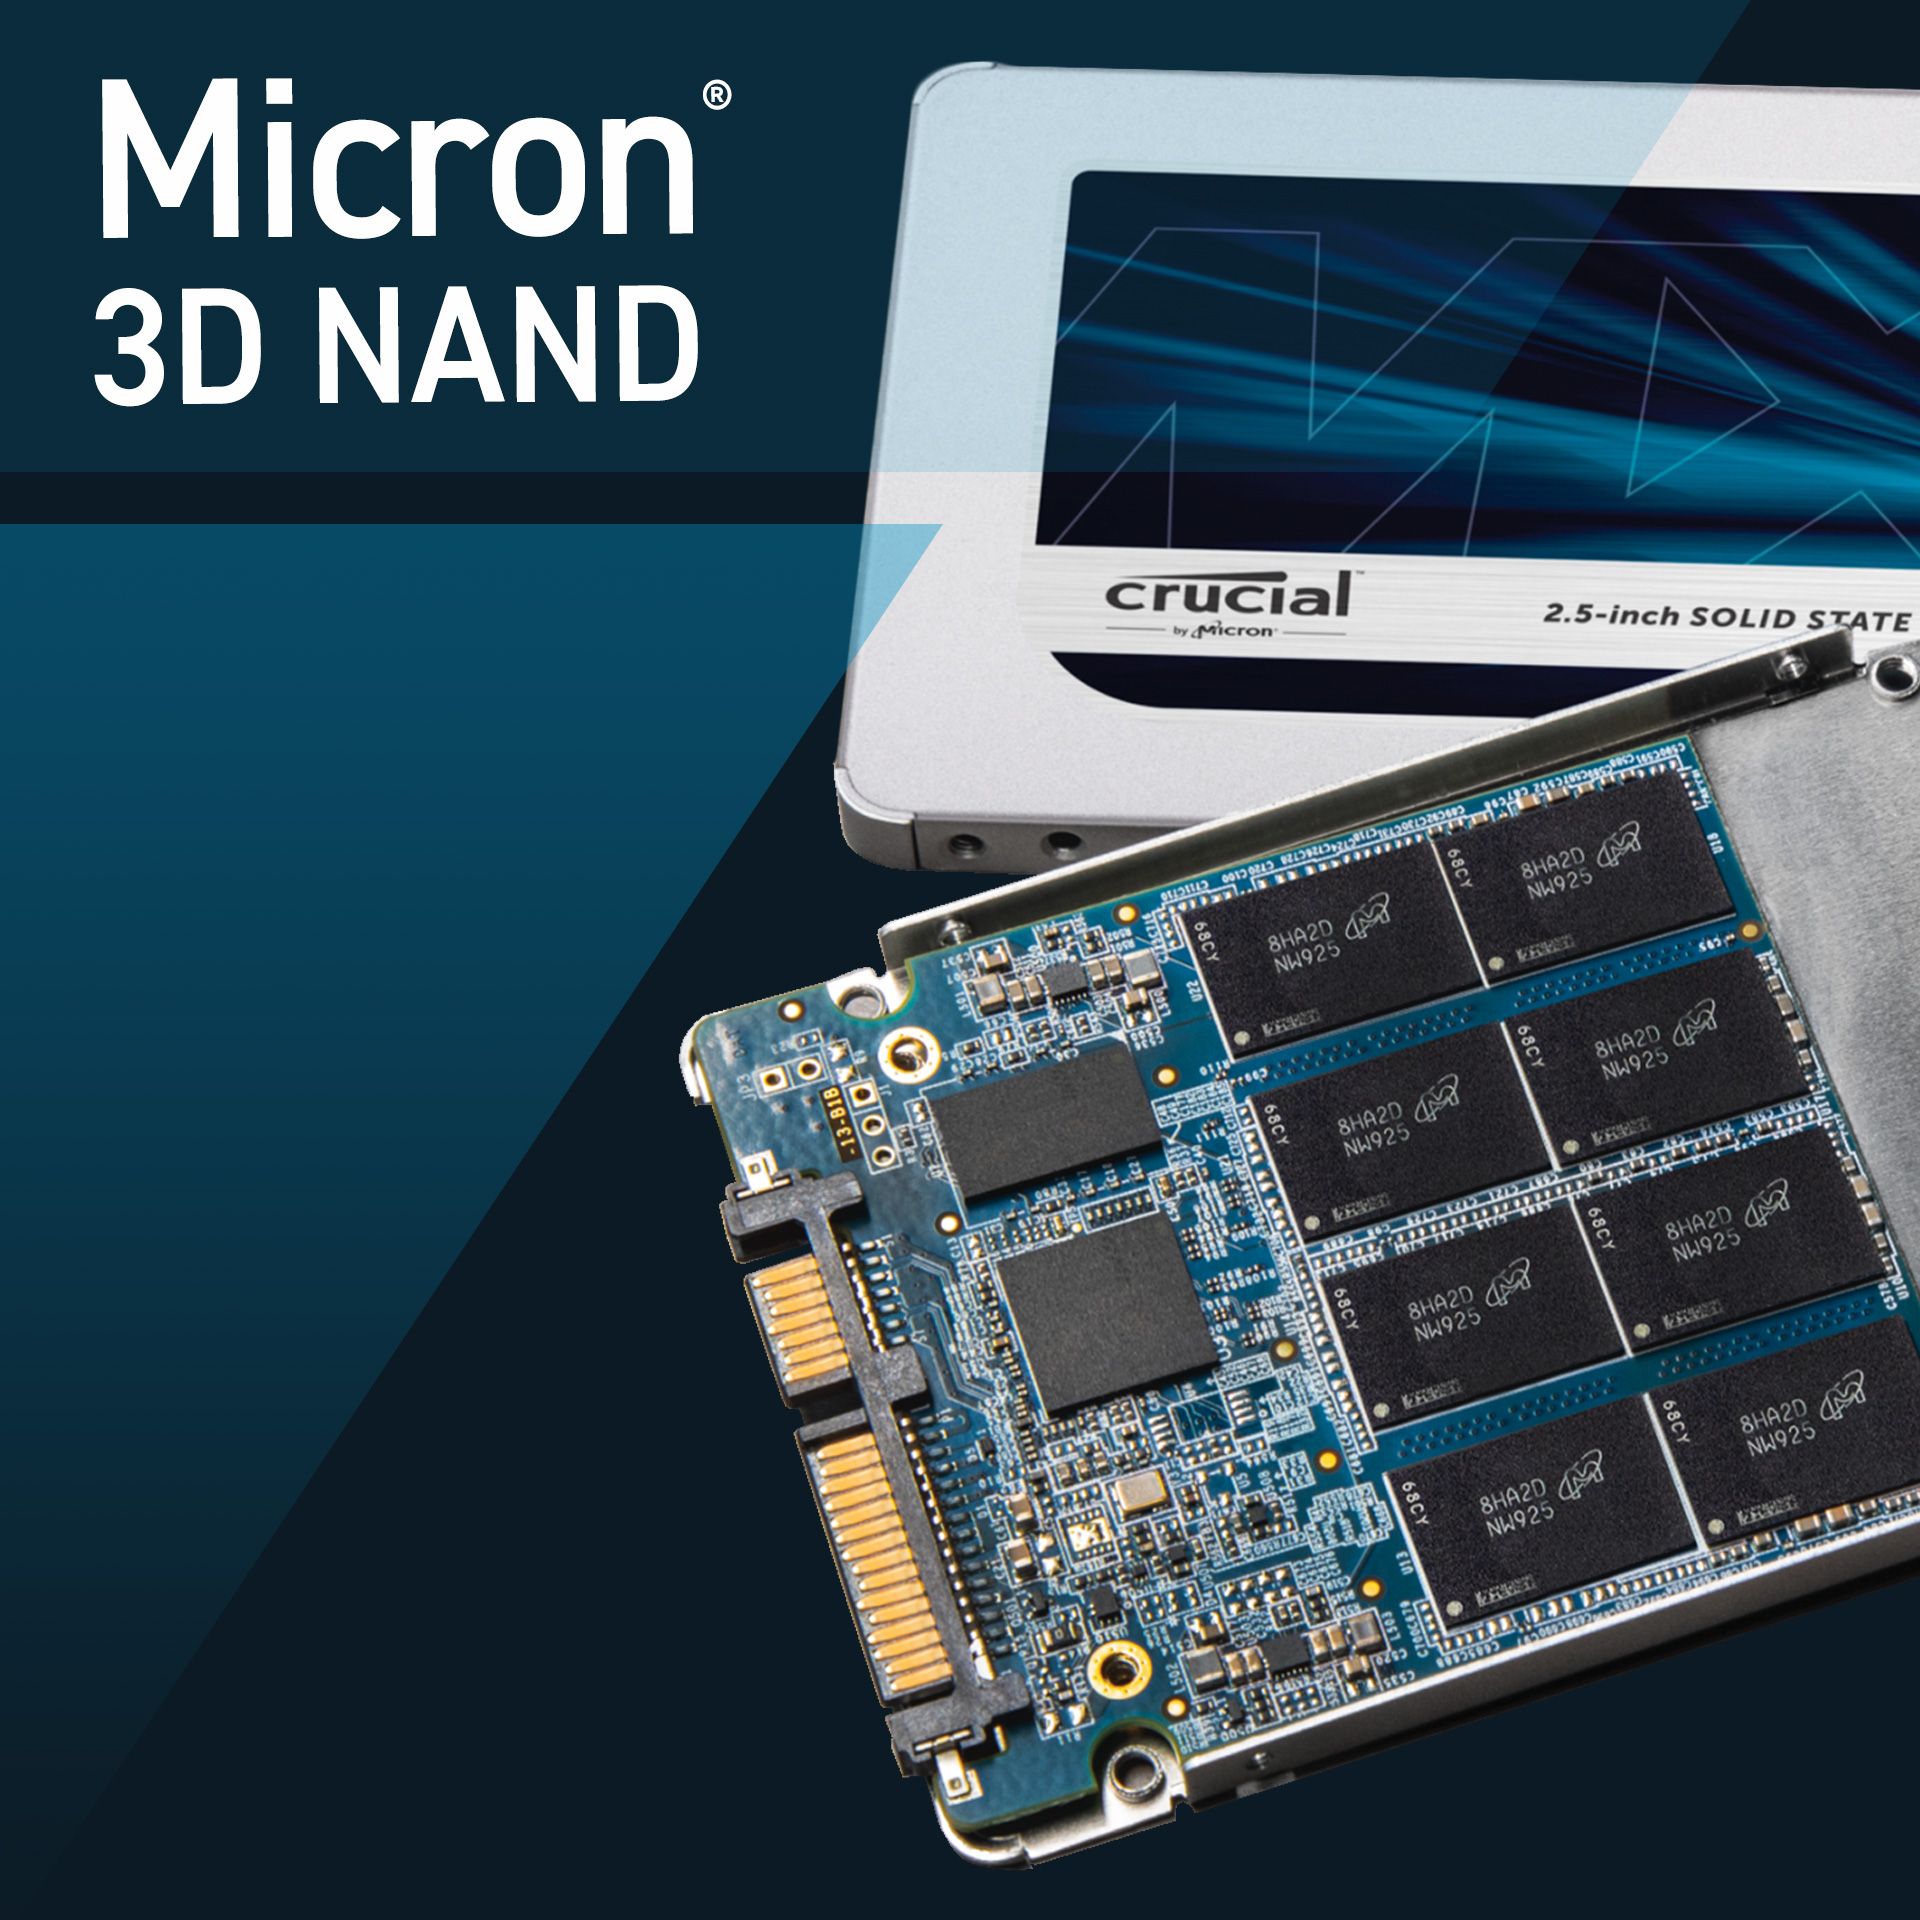 Crucial MX500 4TB 3D NAND SATA 2.5-inch 7mm (with 9.5mm adapter) Internal  SSD | CT4000MX500SSD1 | Crucial.com